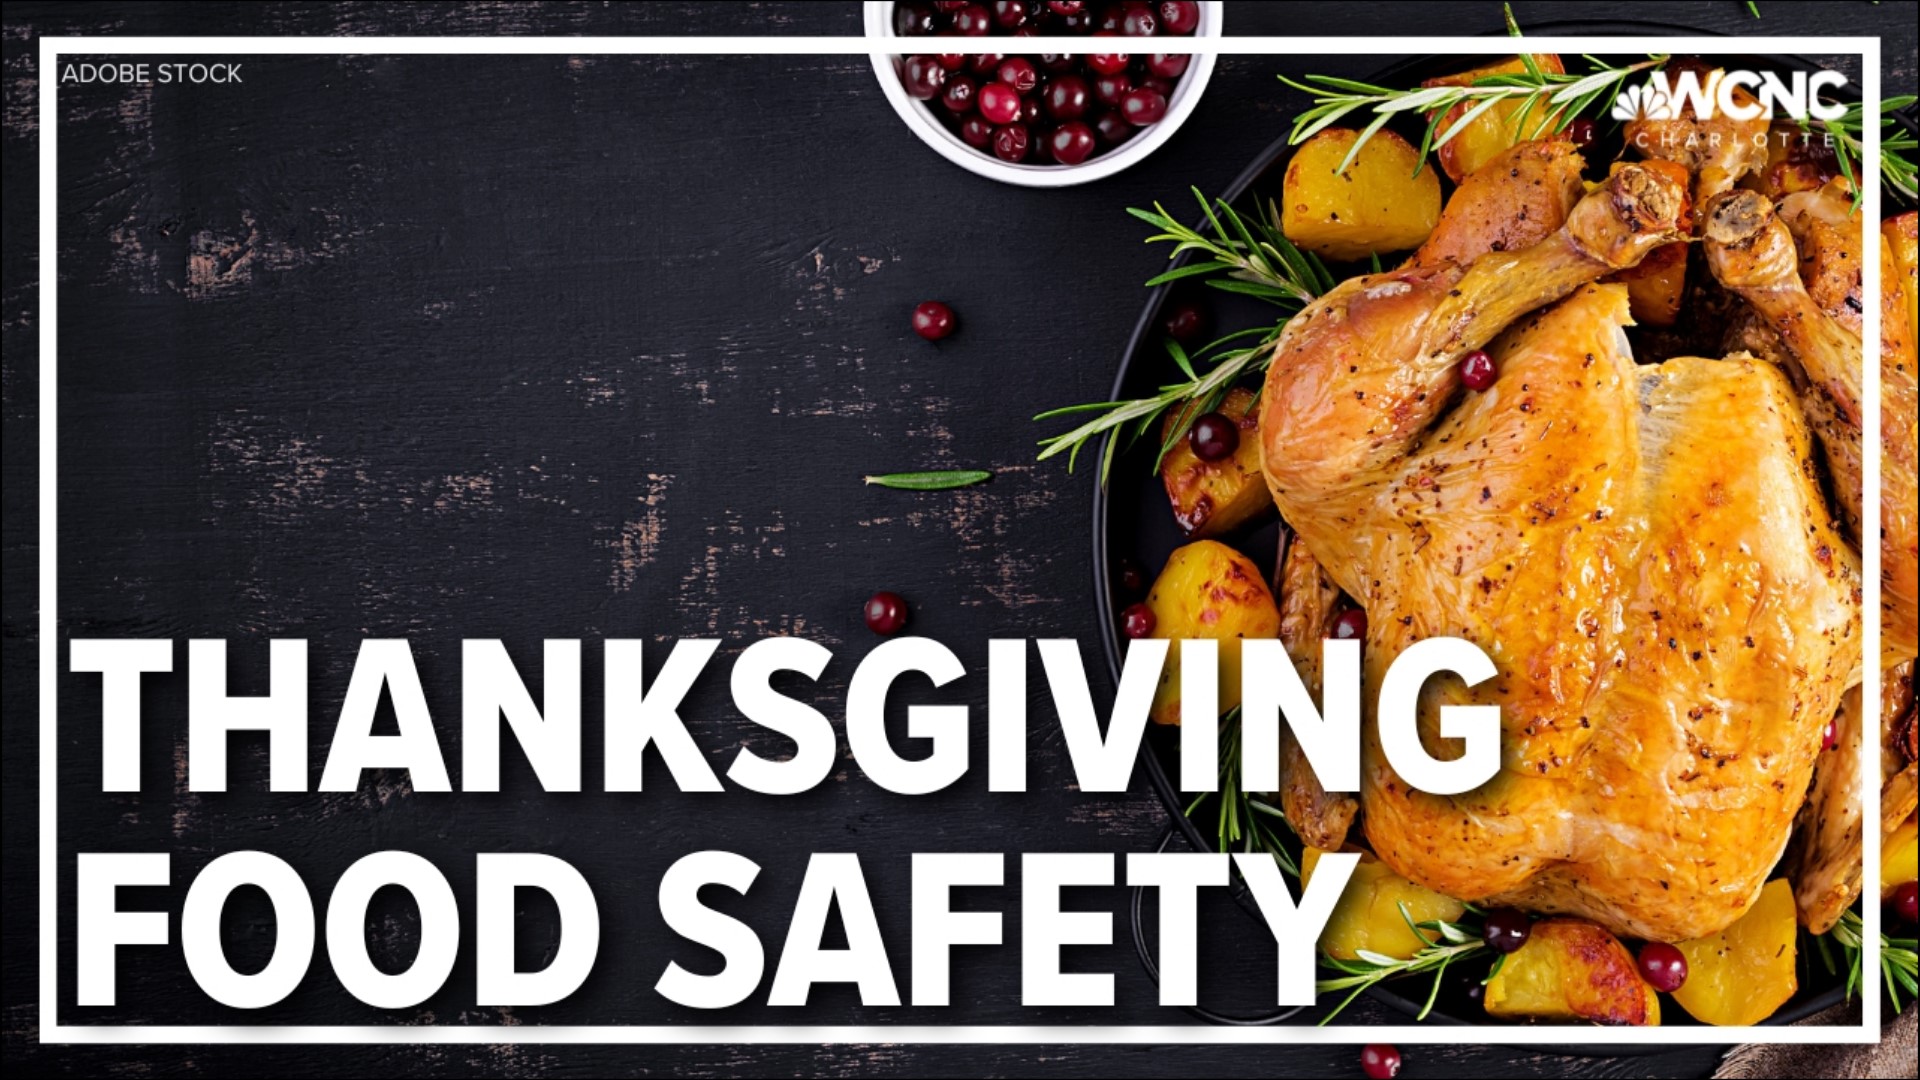 You definitely don't want your Thanksgiving dinner to turn into a food safety nightmare.